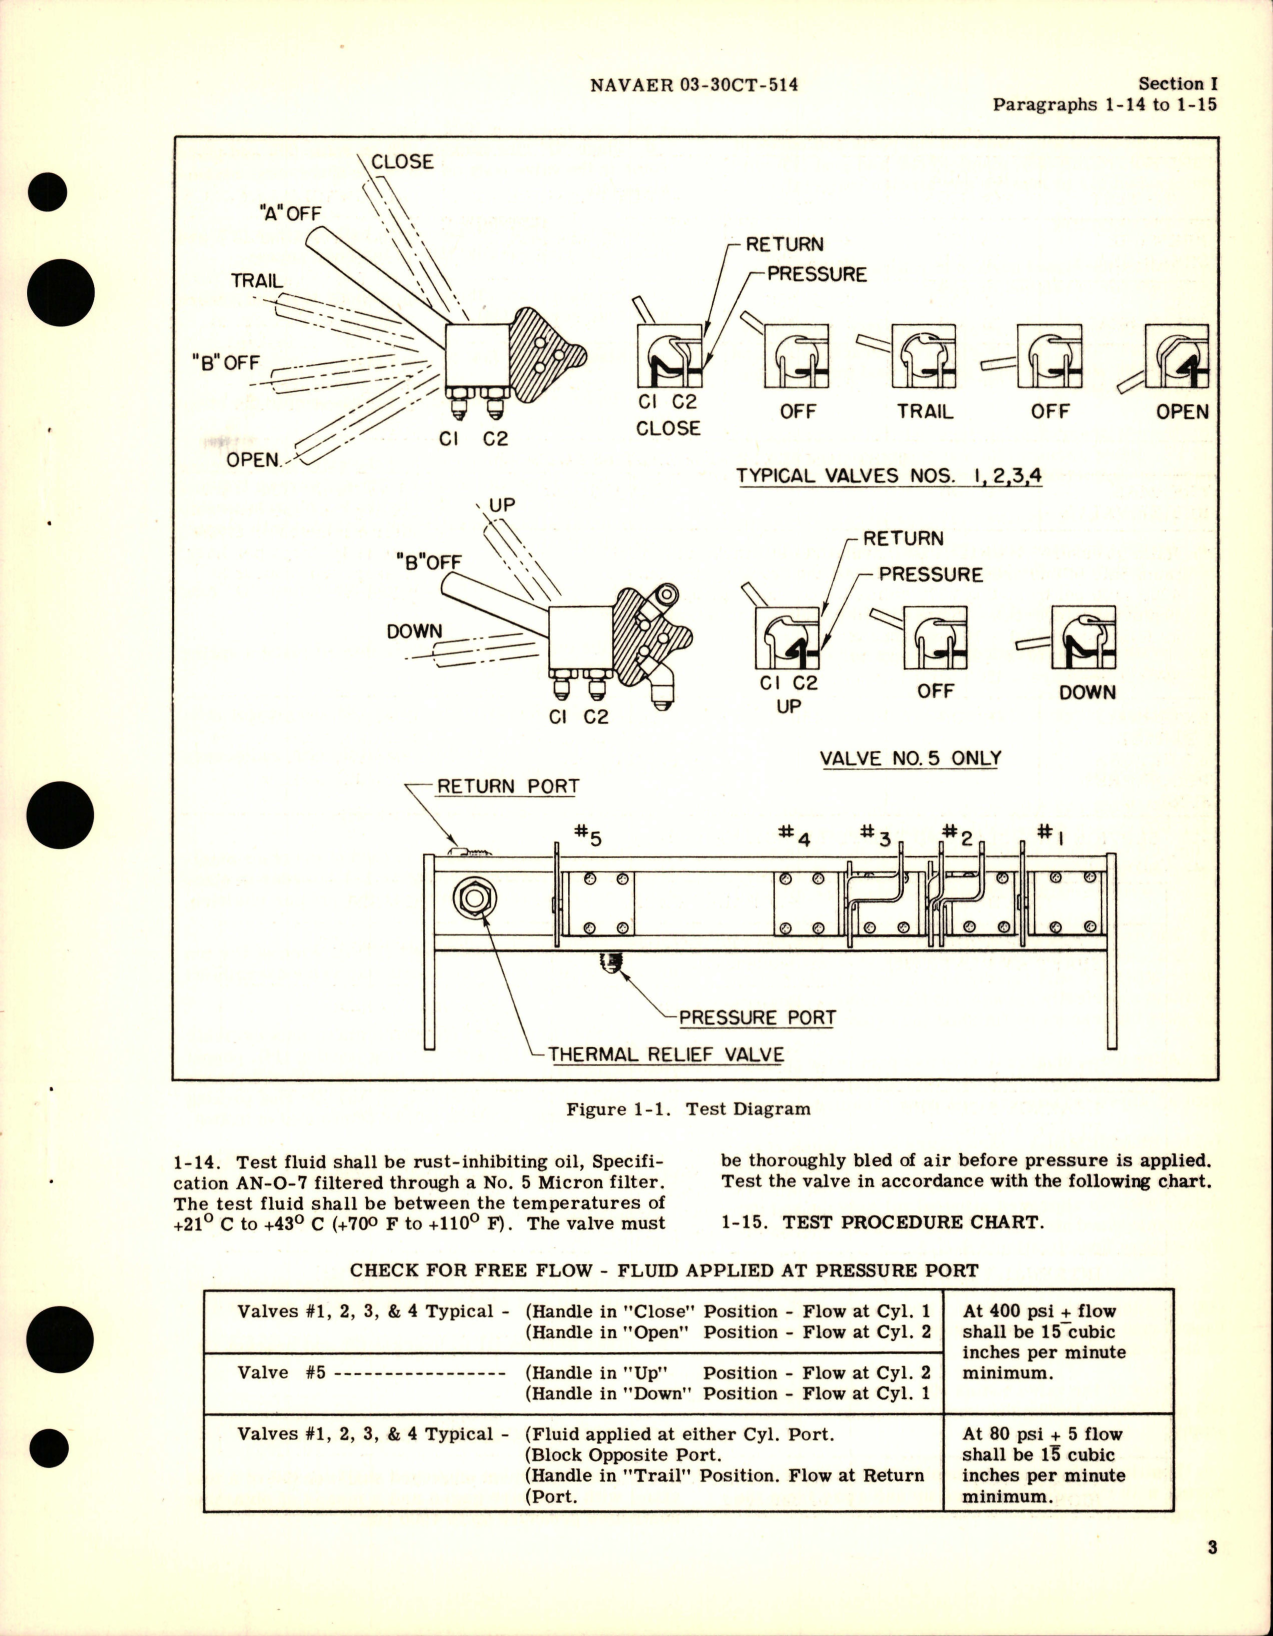 Sample page 5 from AirCorps Library document: Overhaul Instructions with Parts Catalog for Five Unit Manifold Valve - Part 2276